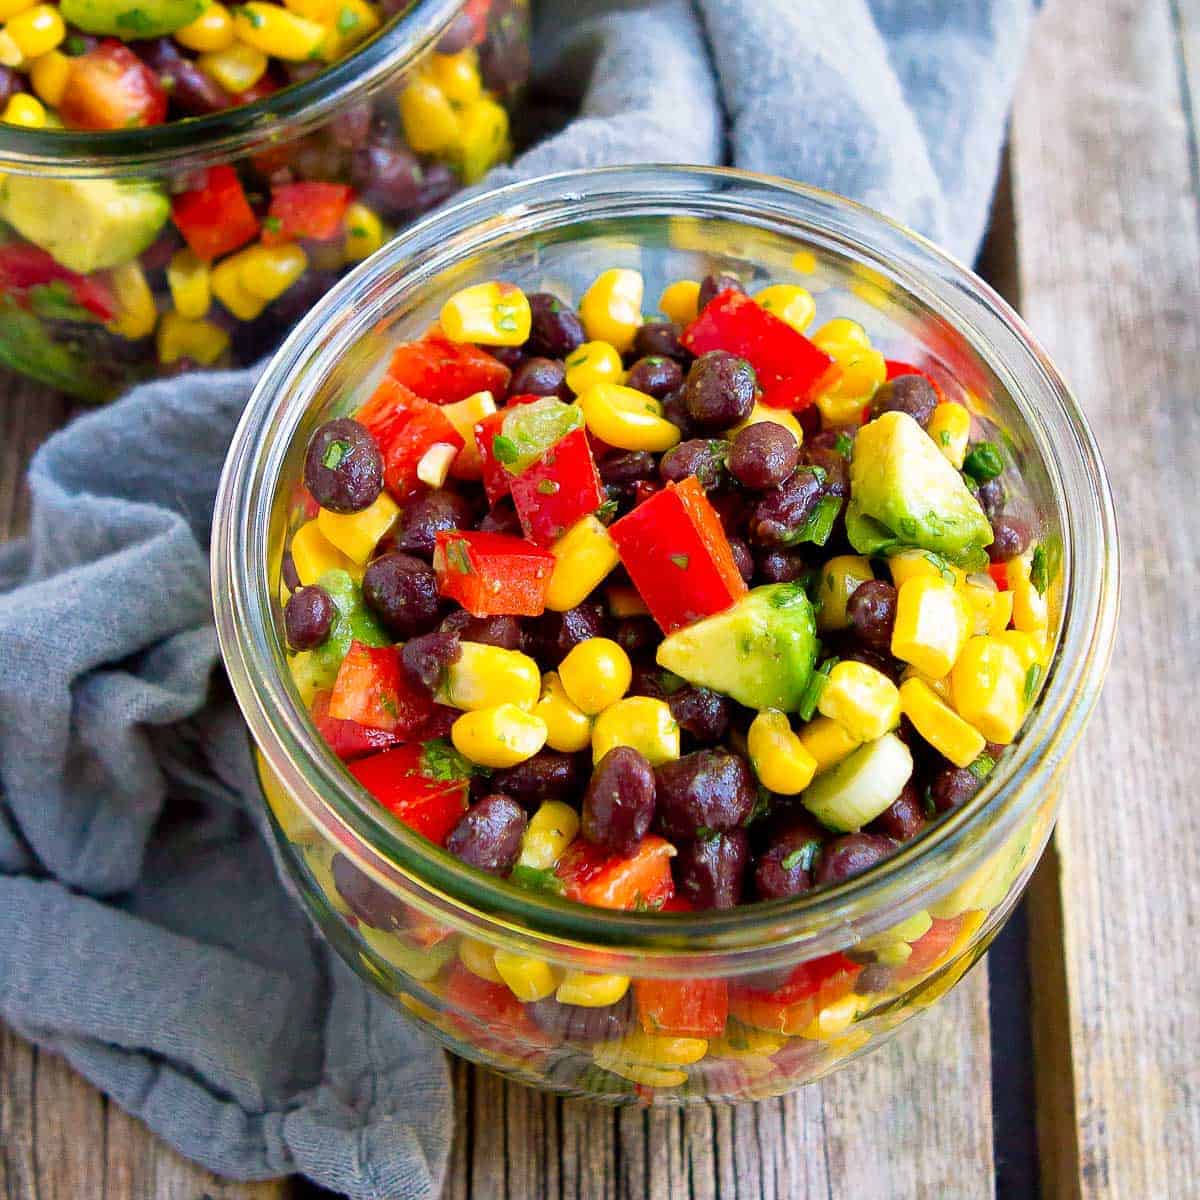 Black bean and corn salad with avocado in a glass jar.